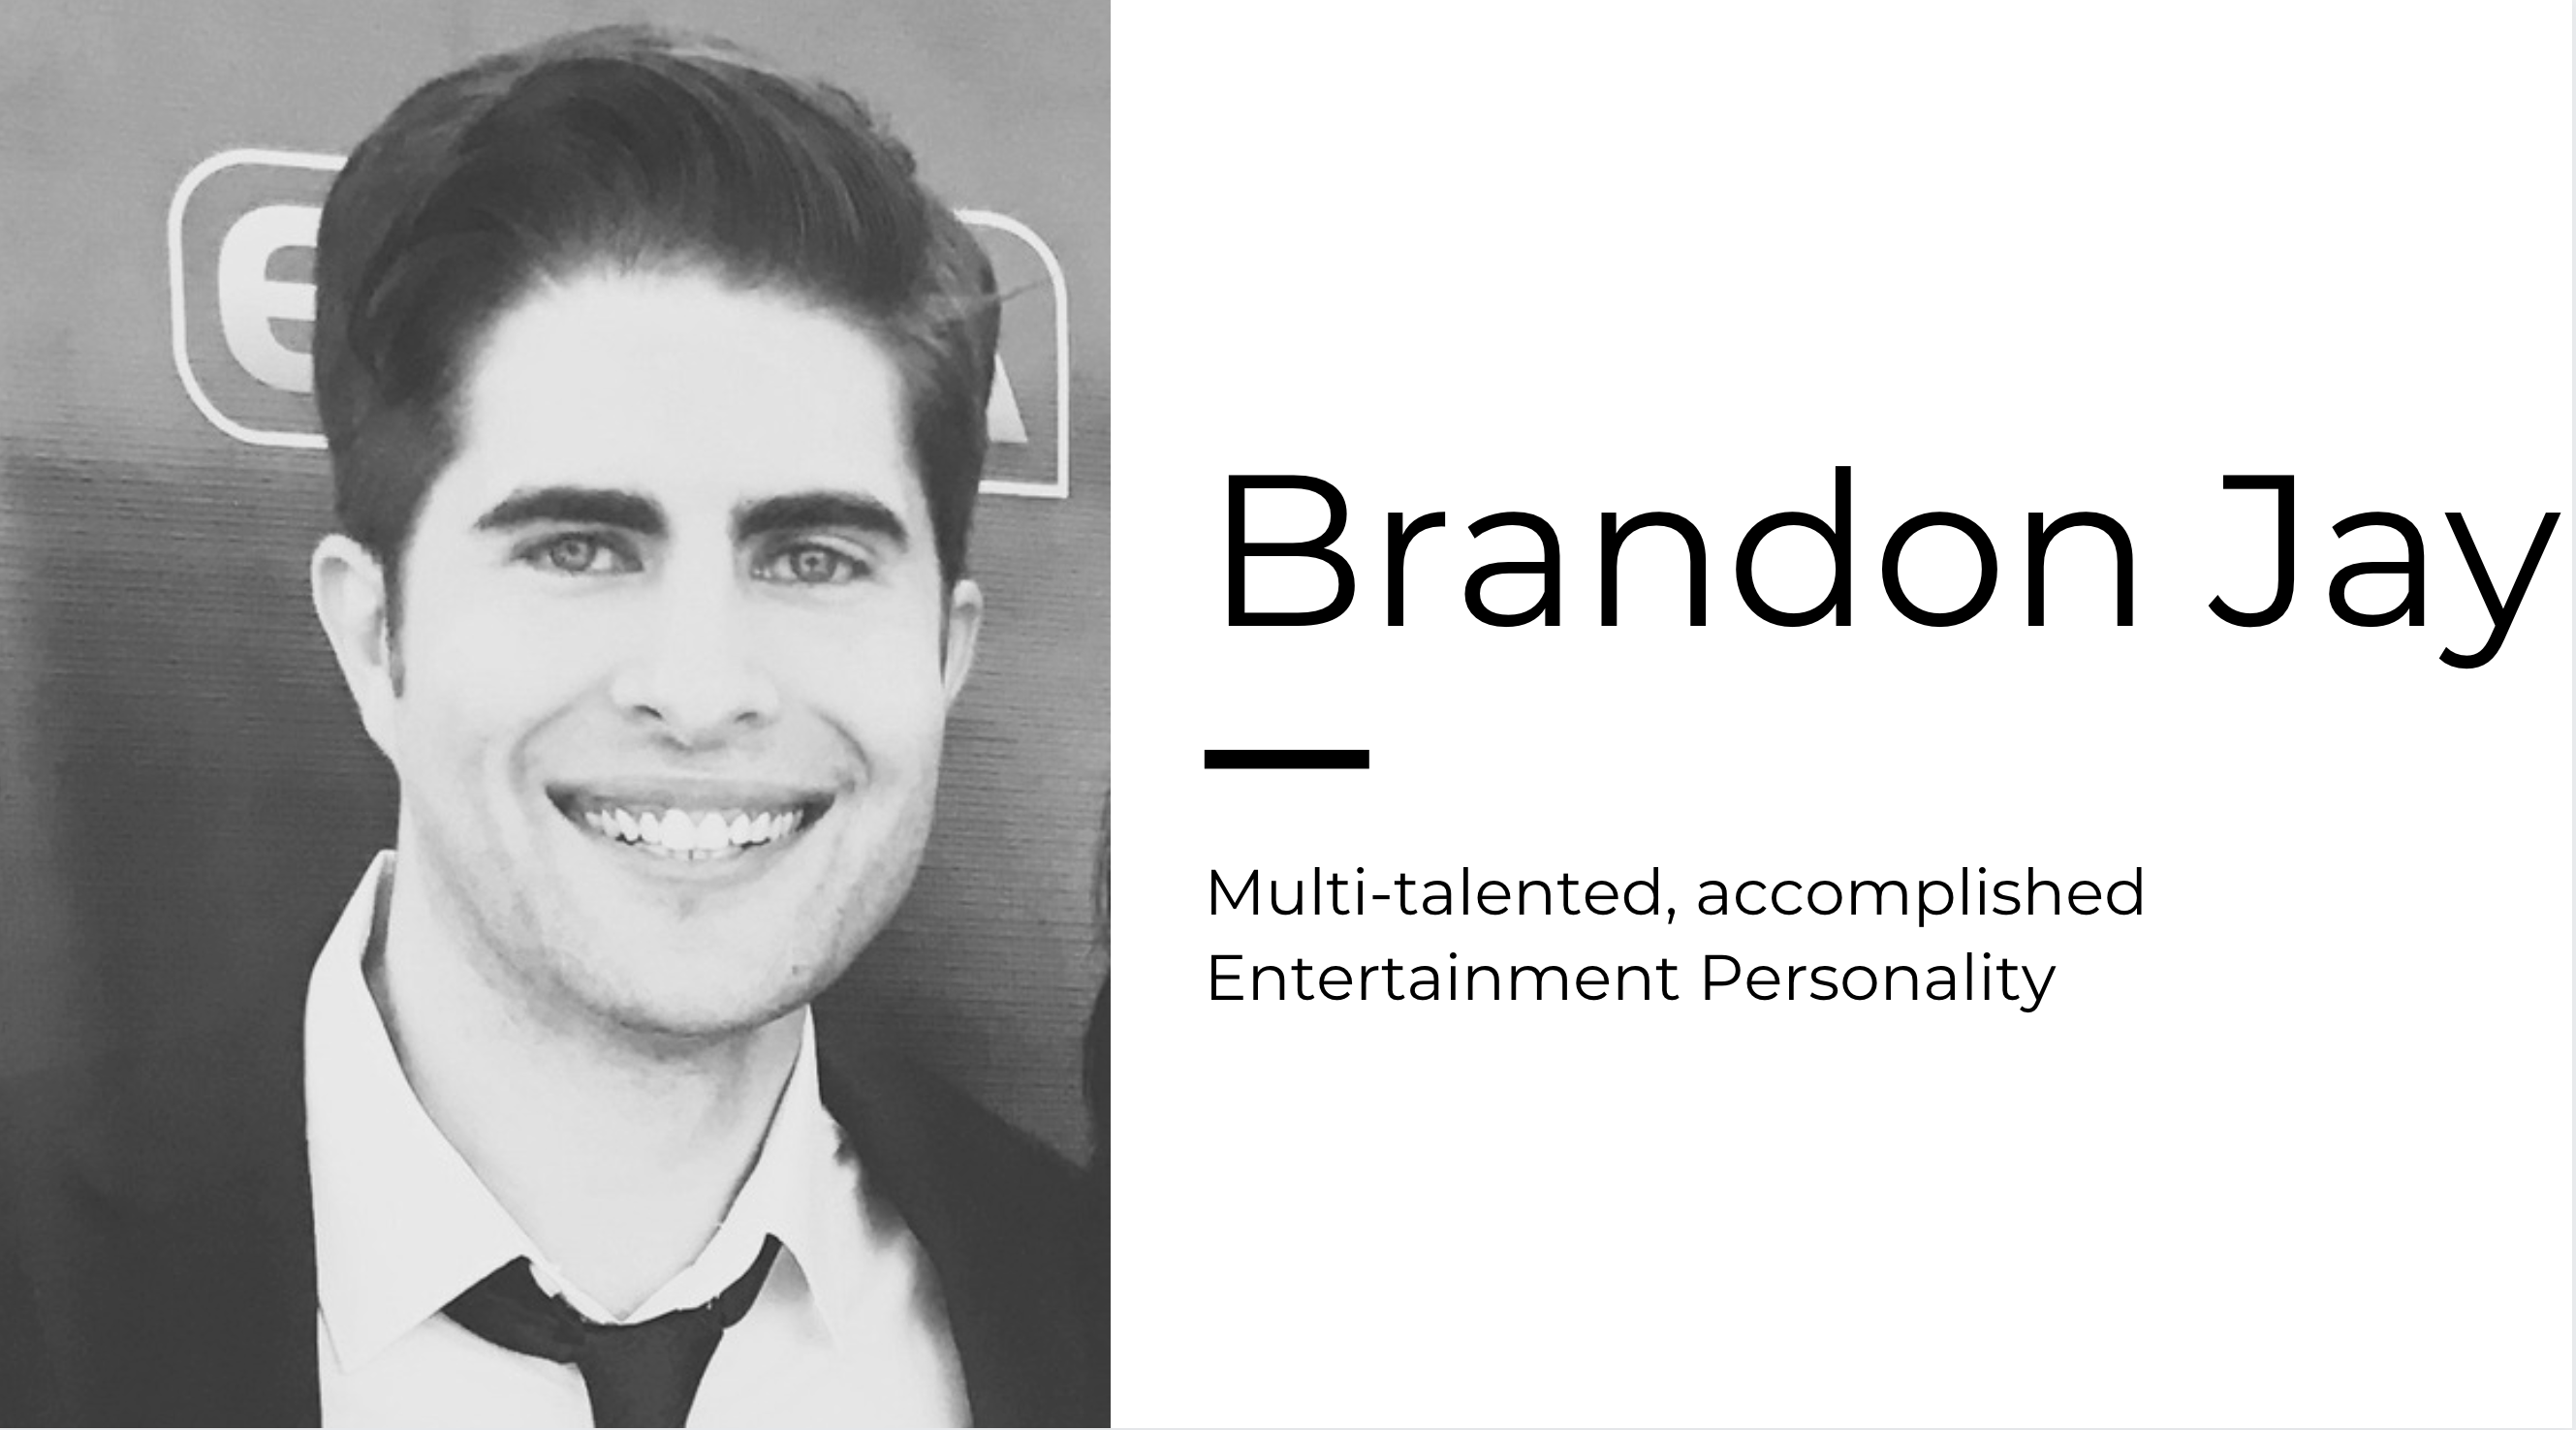 Brandon Jay- is a multi-talented, accomplished Entertainment Personality - Lamo Footwear